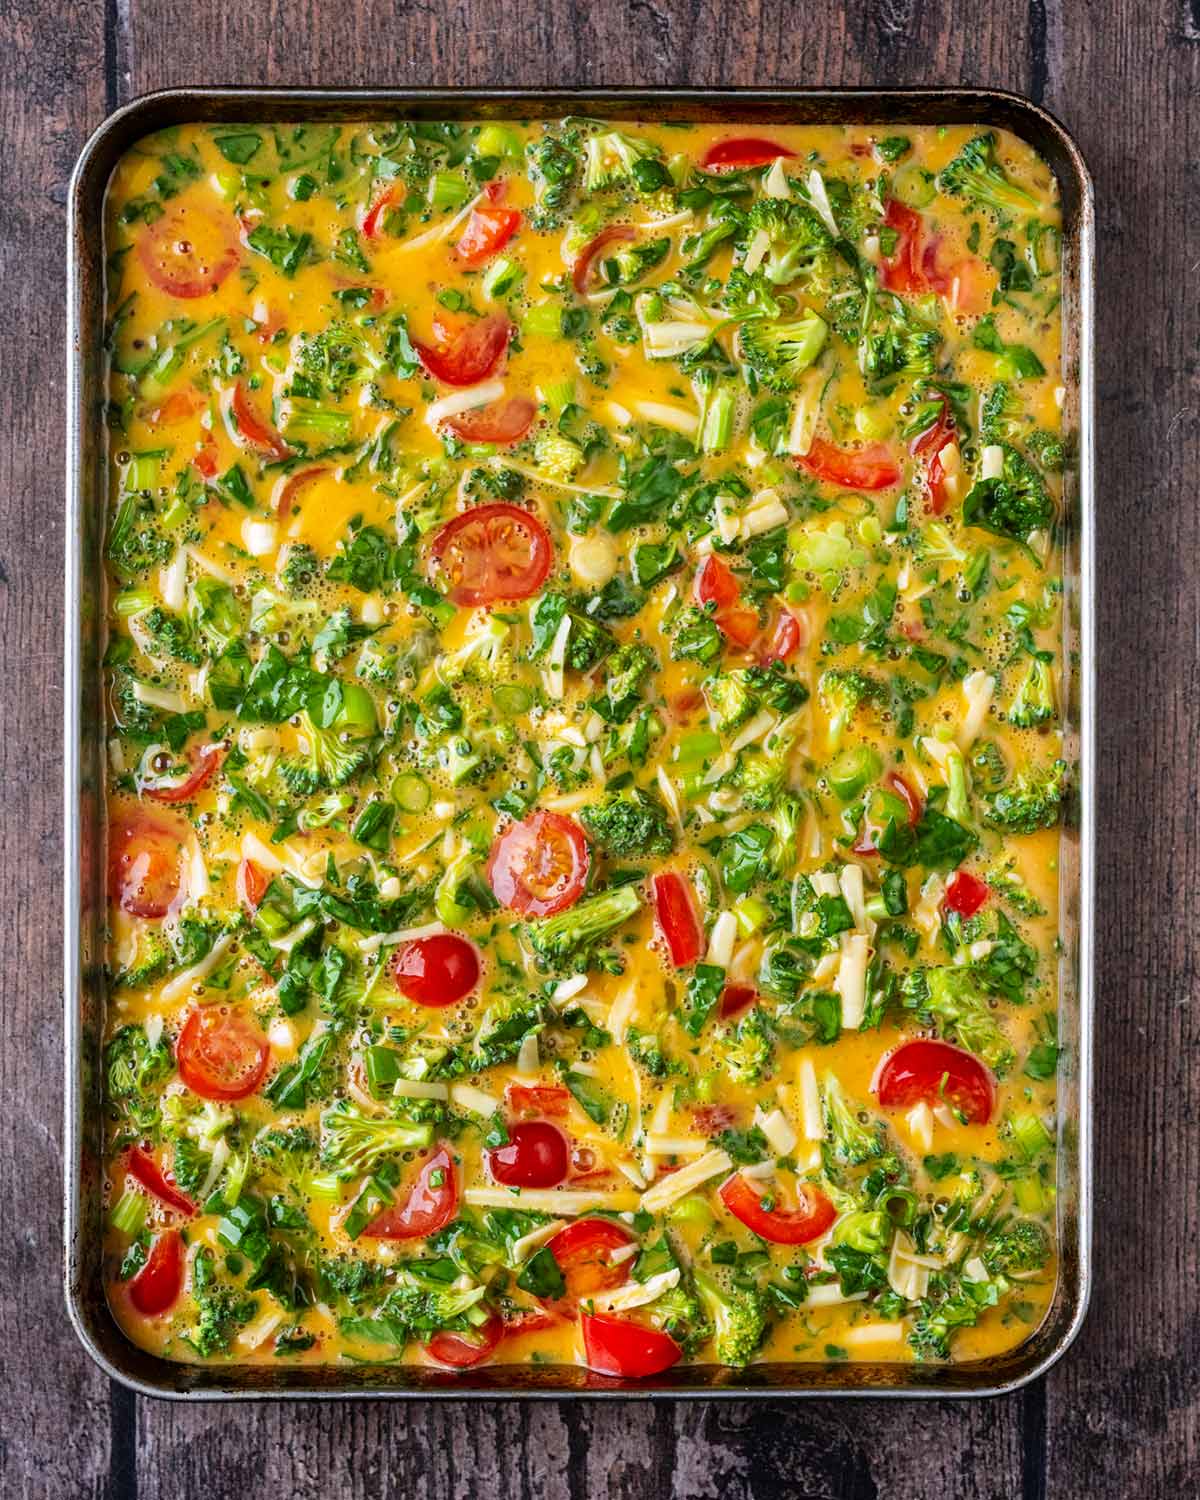 The egg and vegetable mixture poured into a sheet pan.